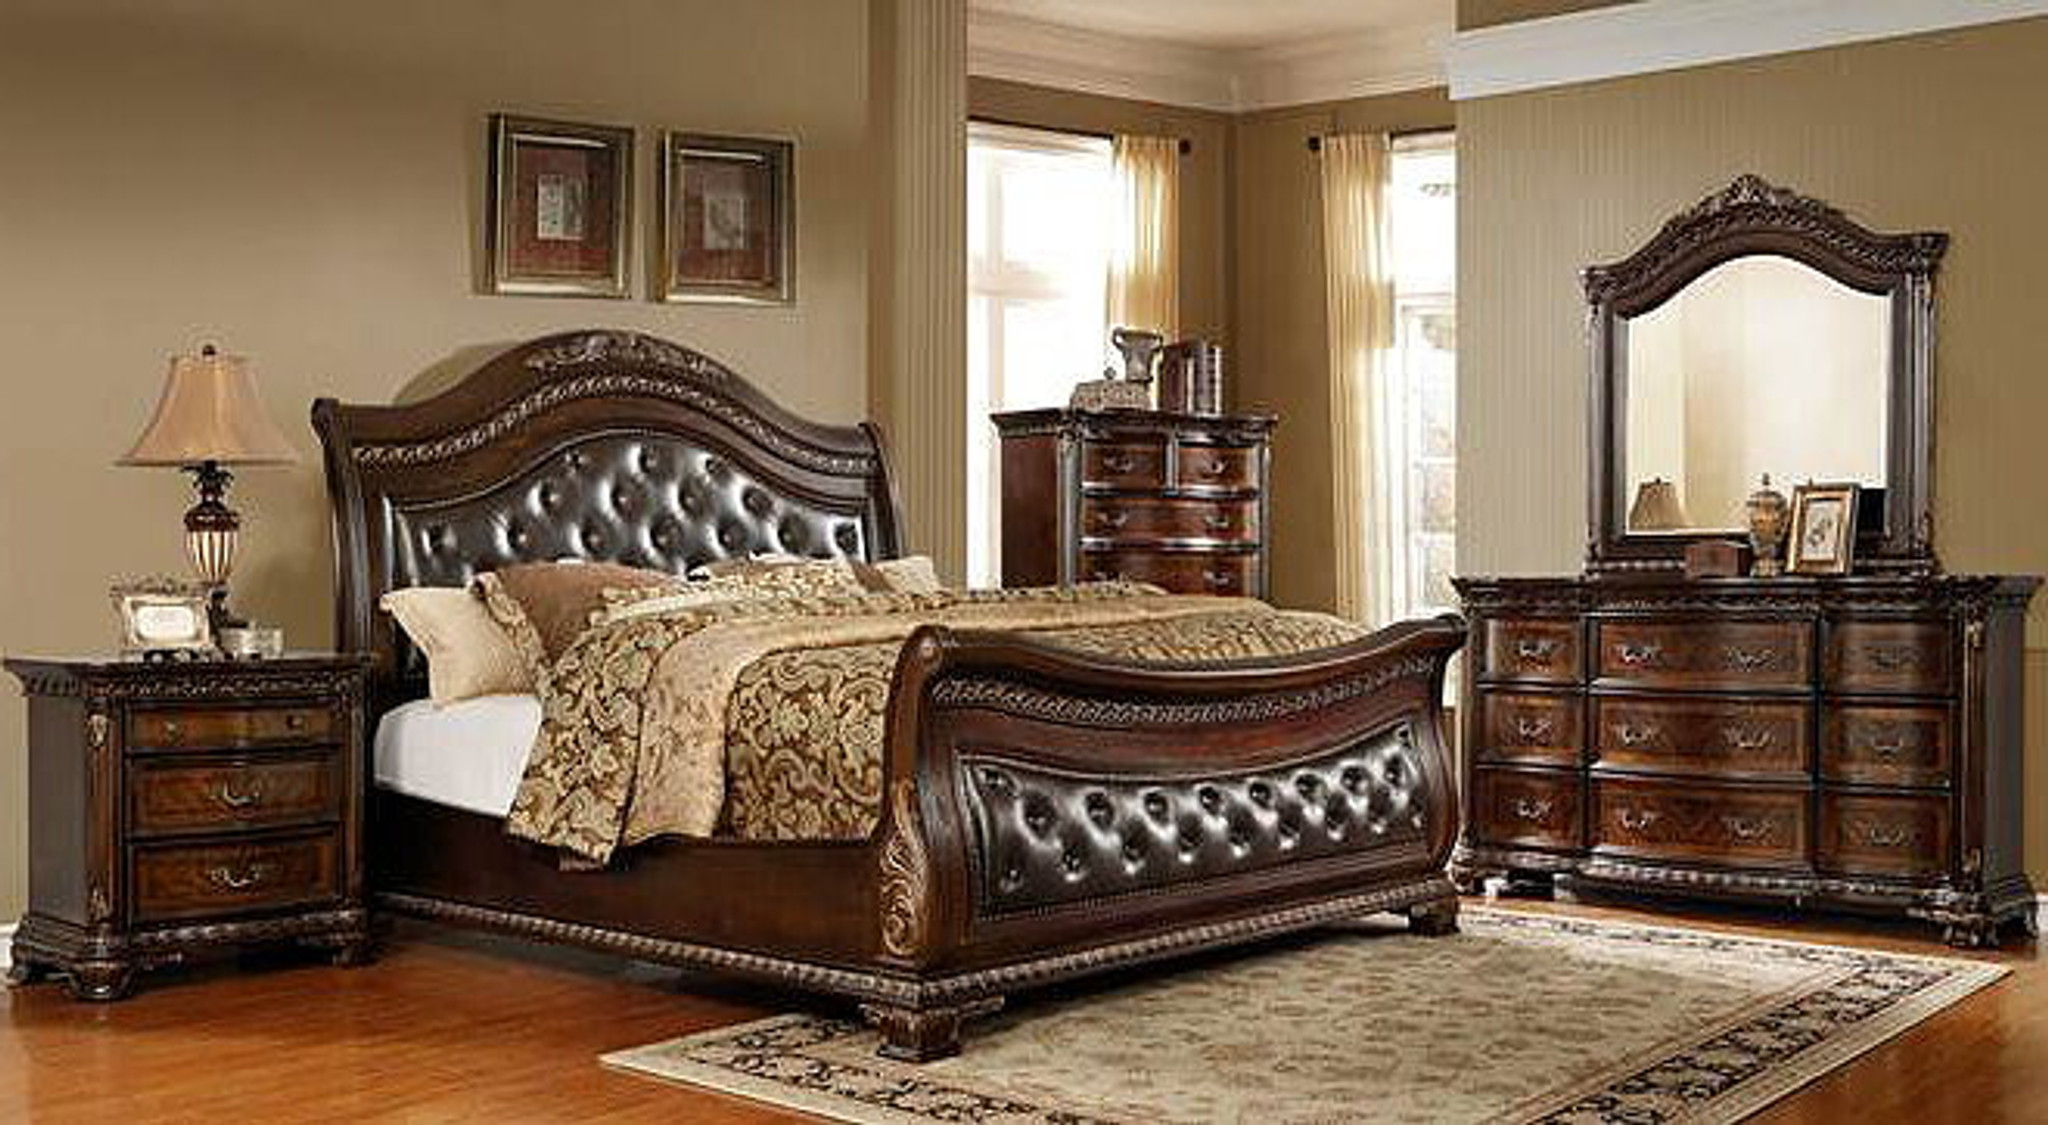 King Size Bedroom Decorations